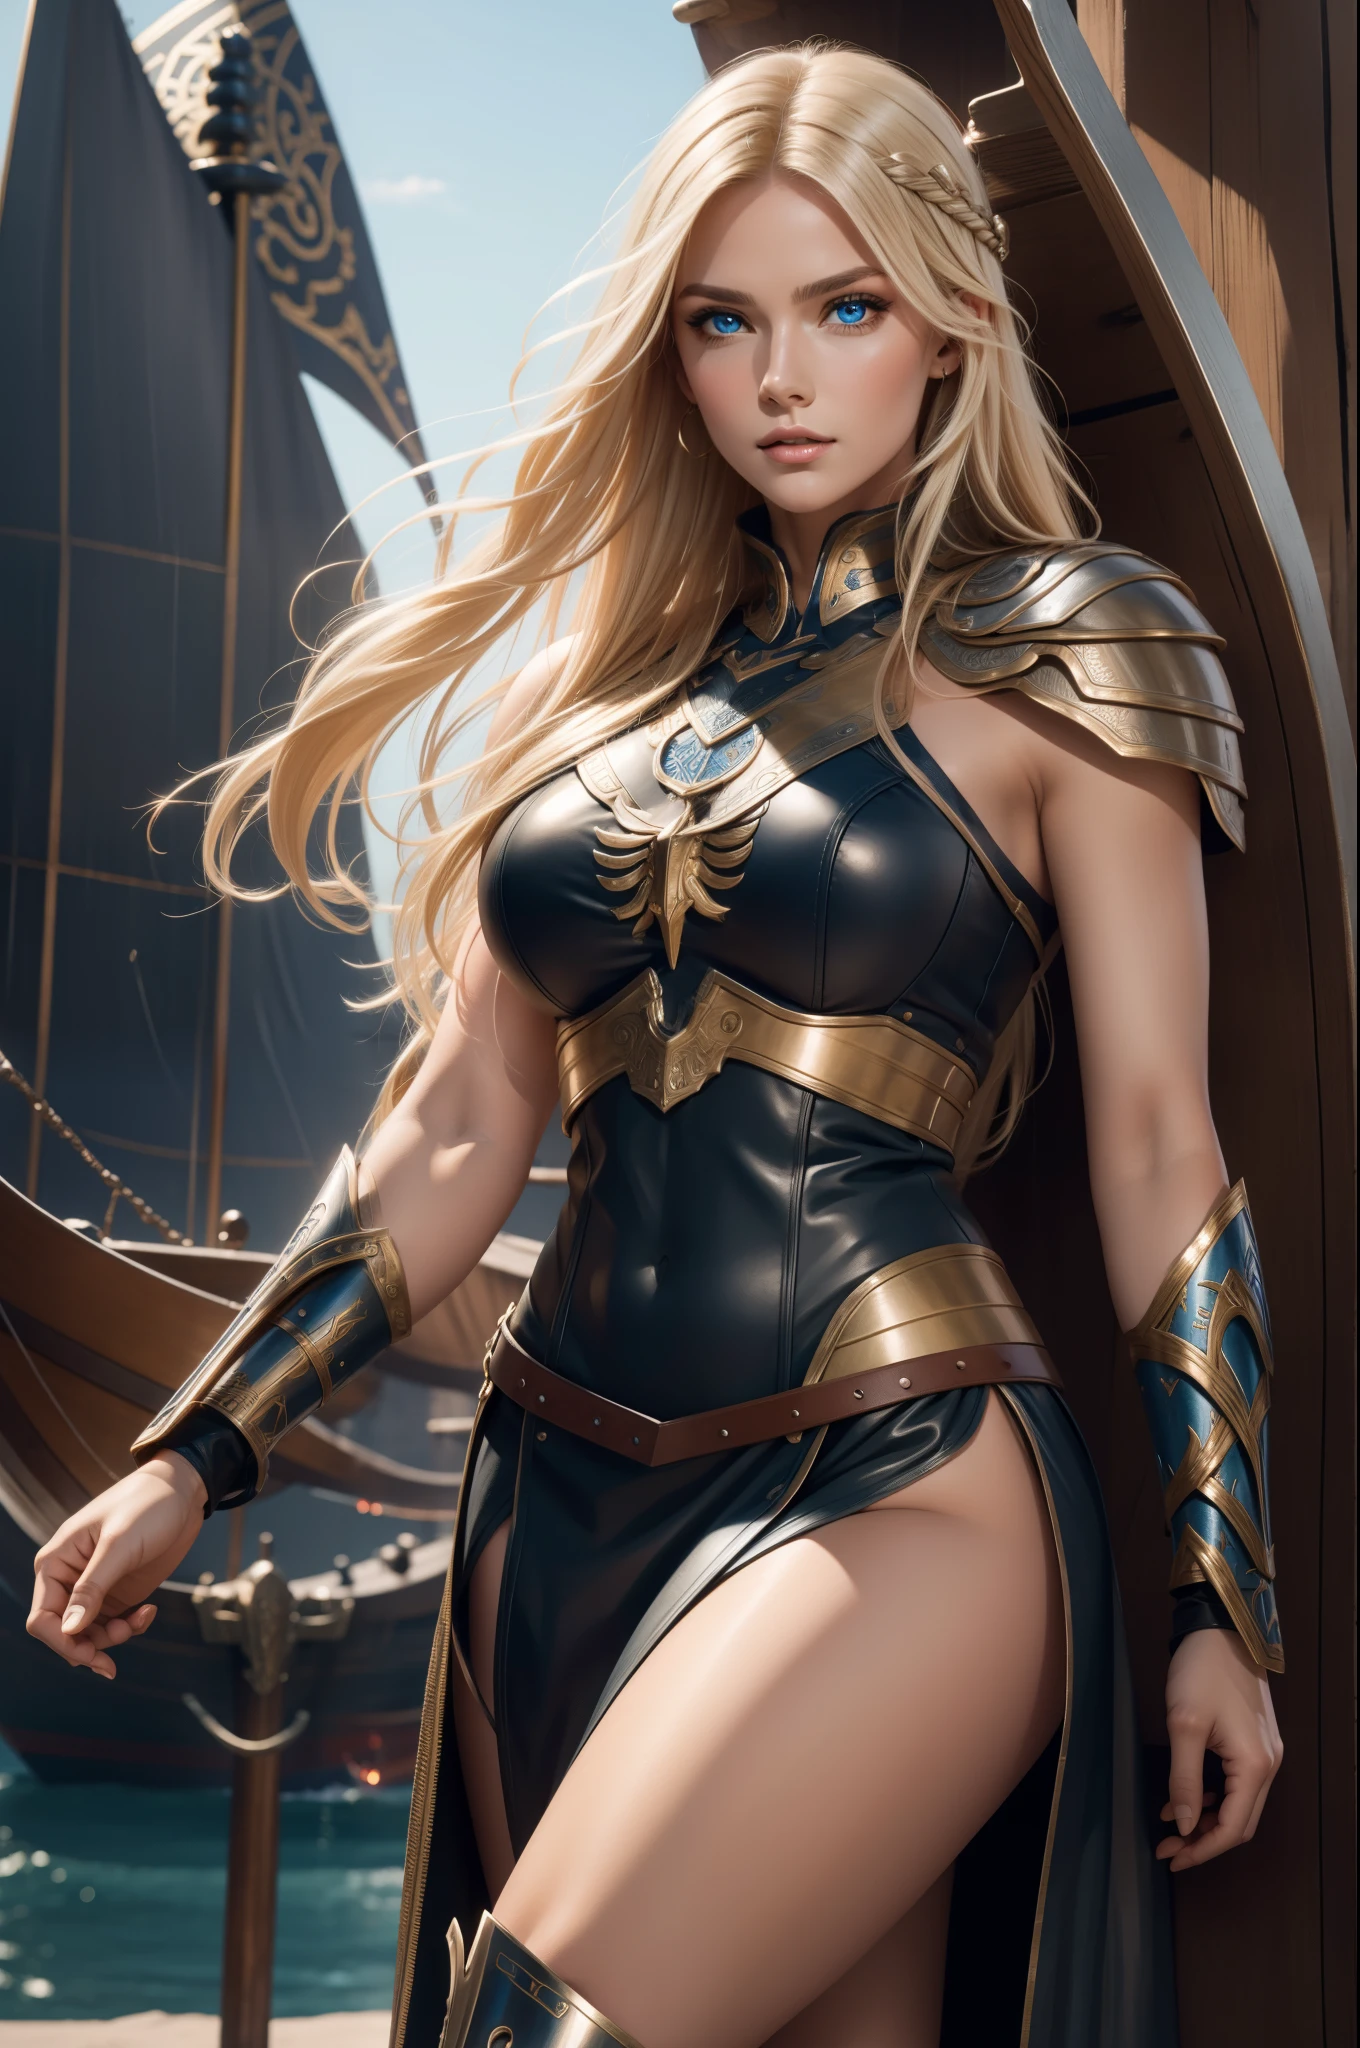 Gorgeous Woman, Valkyrie, Long blonde hair, blue eyes, detailed facial features, proportional hands, proportional fingers, leather armor, viking ship,